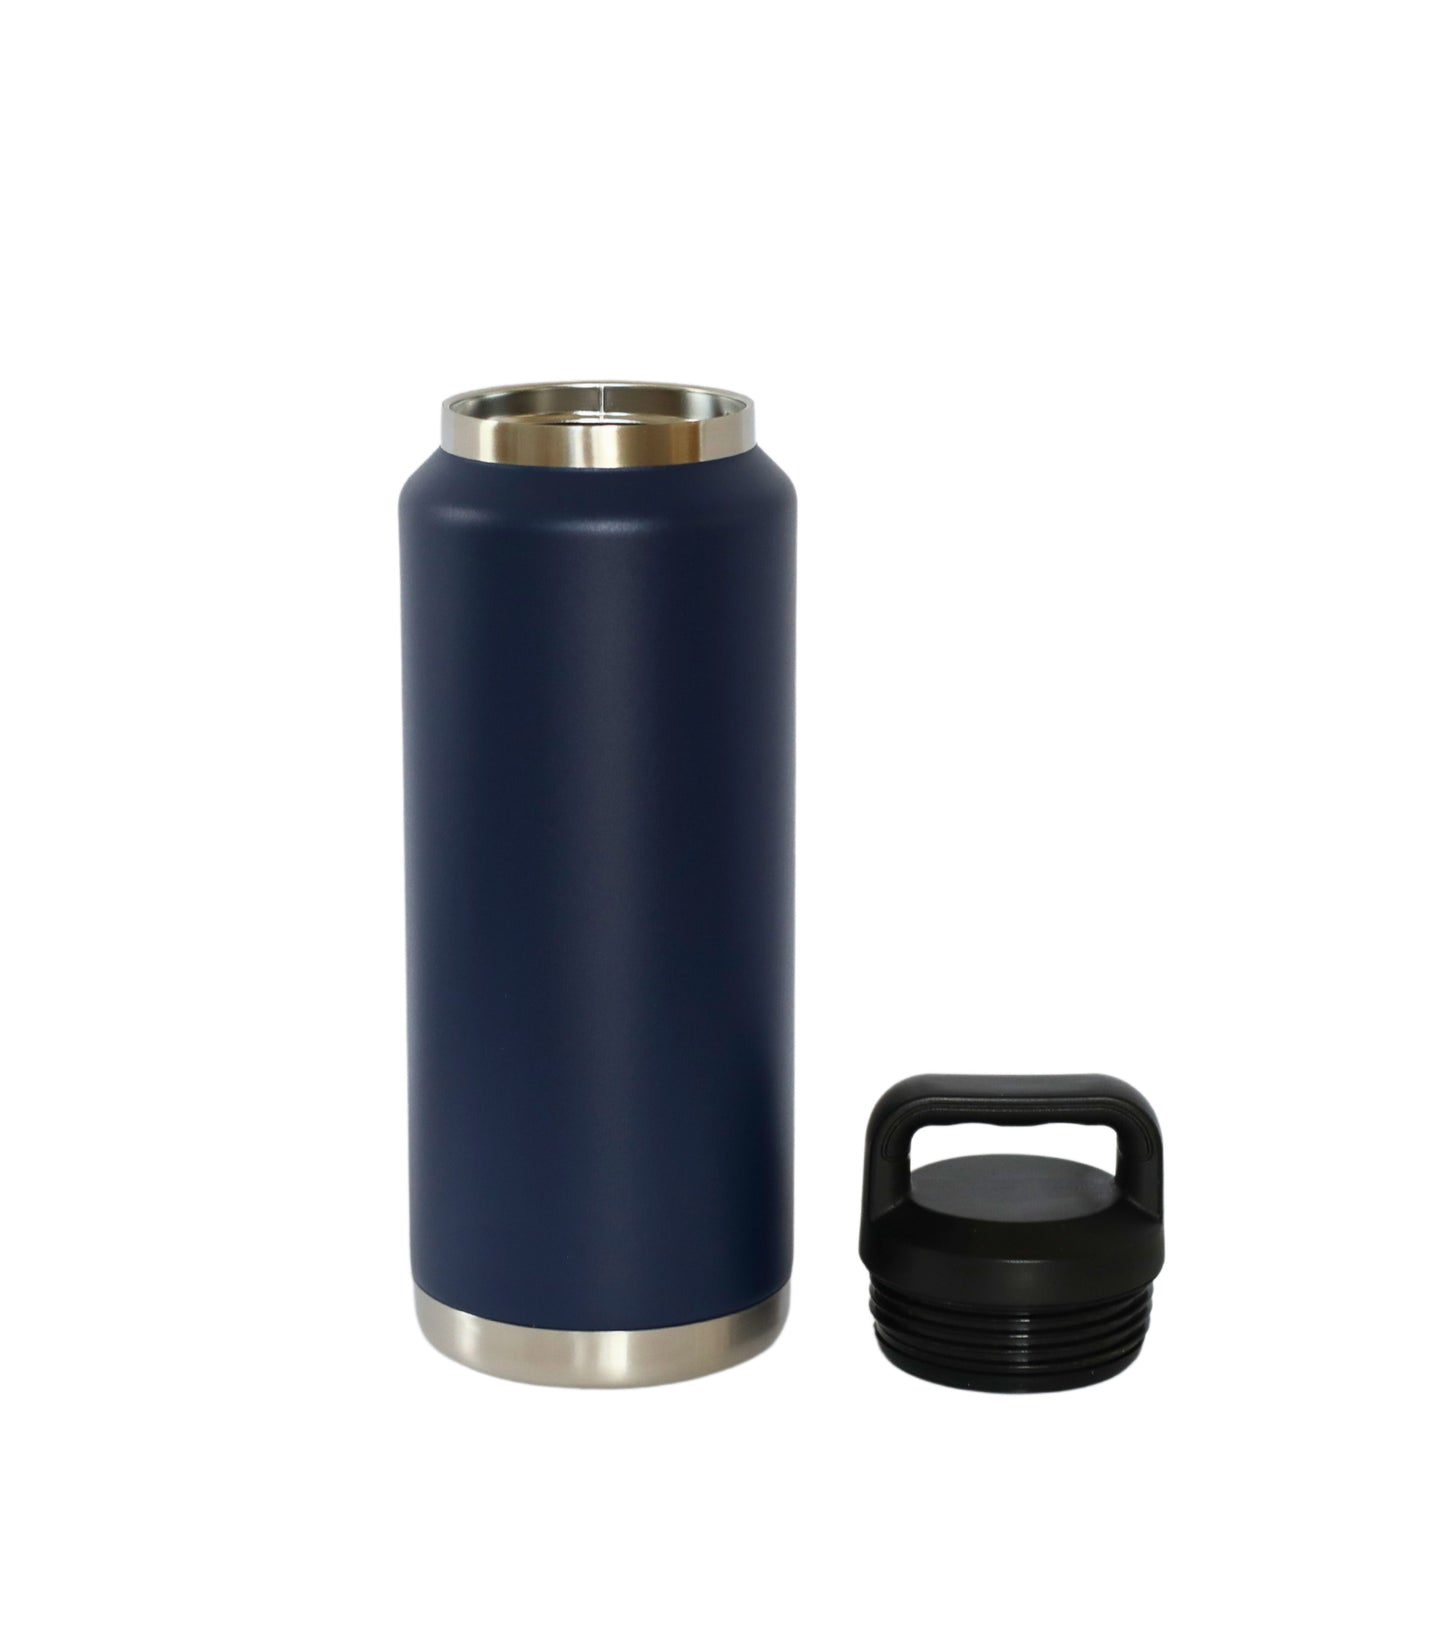 36 Oz Stainless Steel Water Bottle - Navy